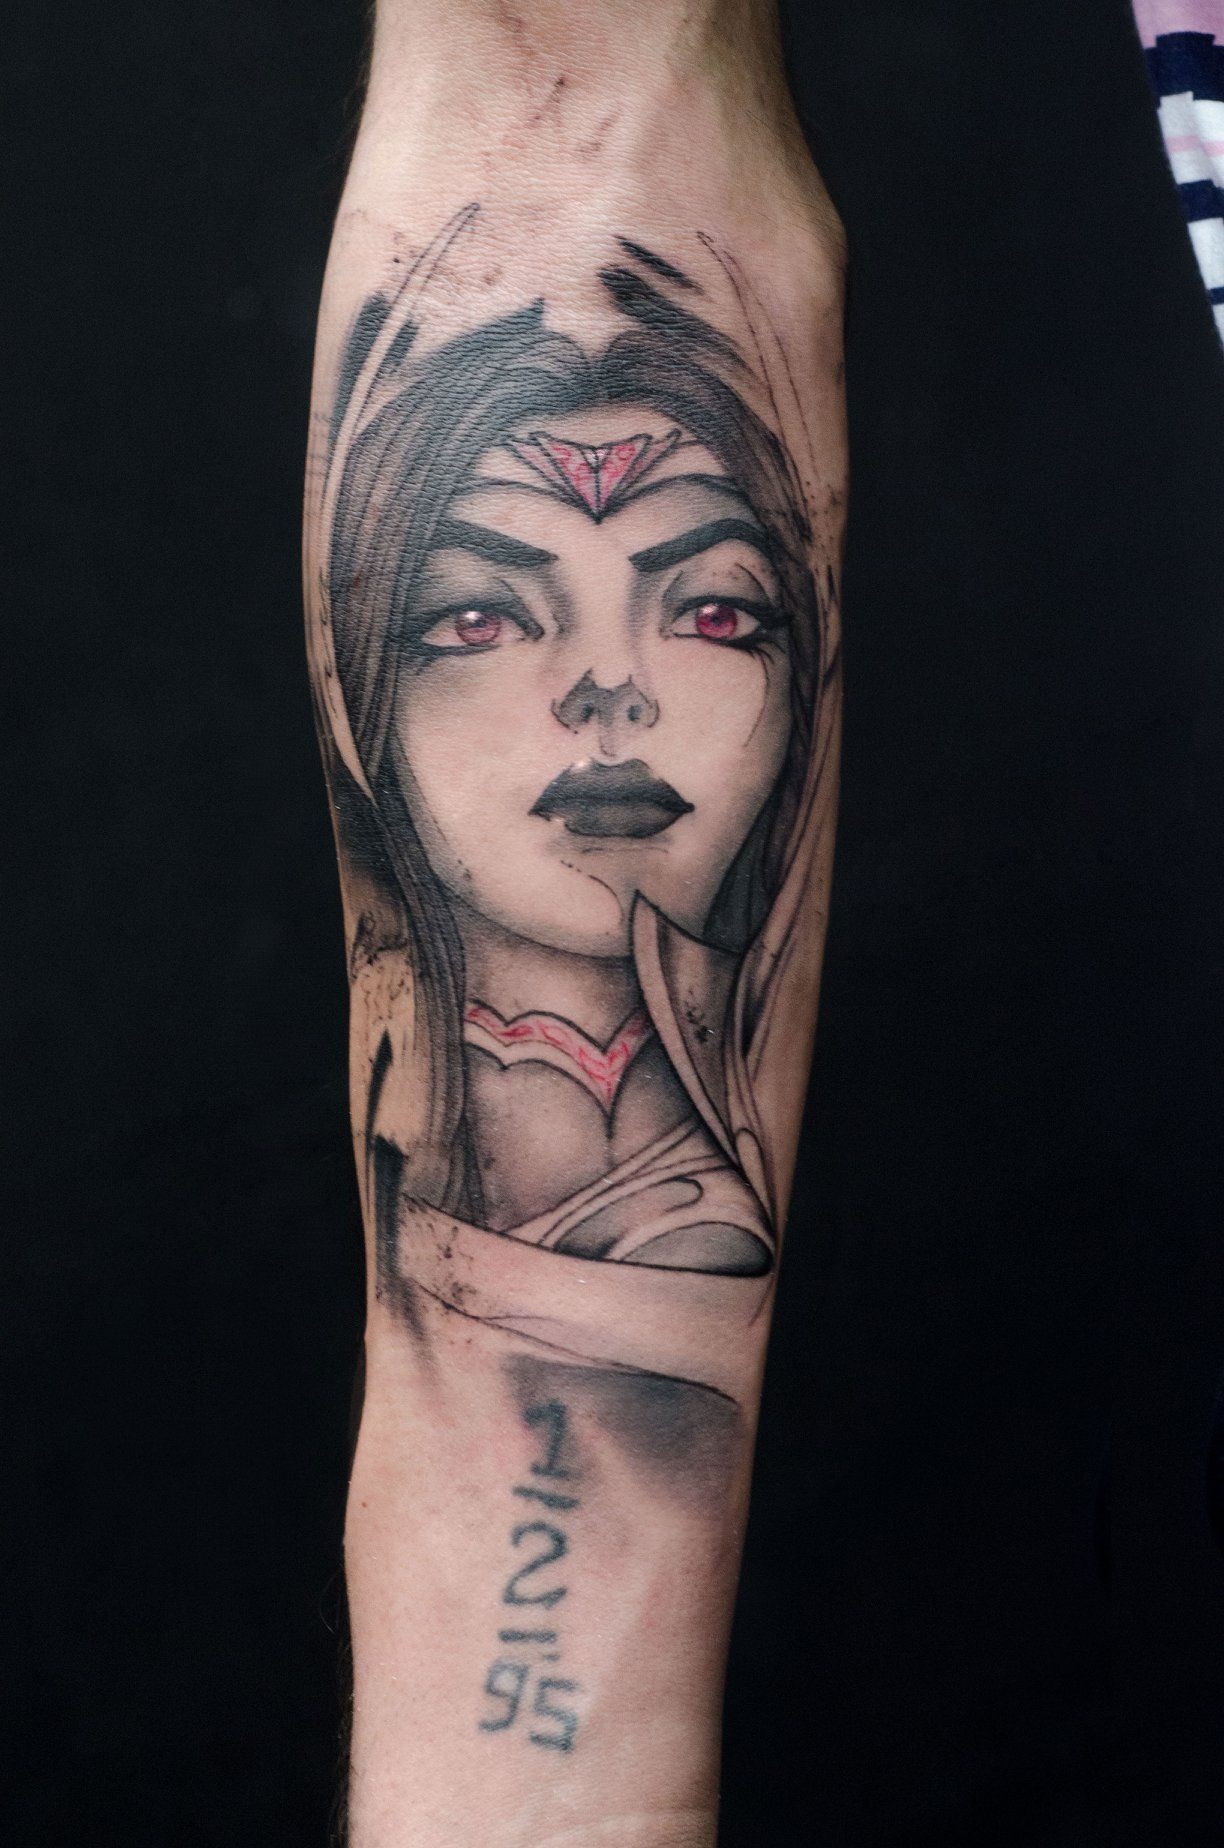 arm tattoo of Irelia's face from League of Legends